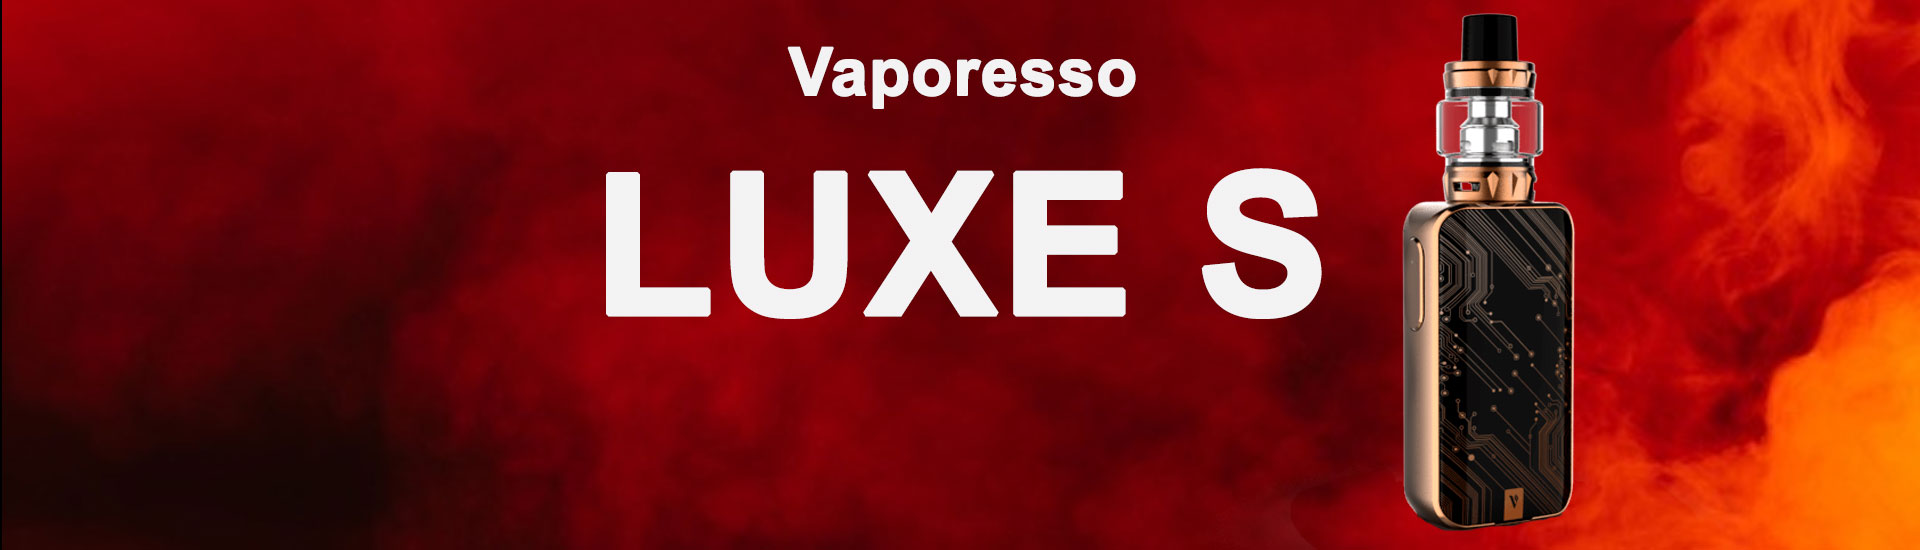 vaporesso-luxe-s-banner